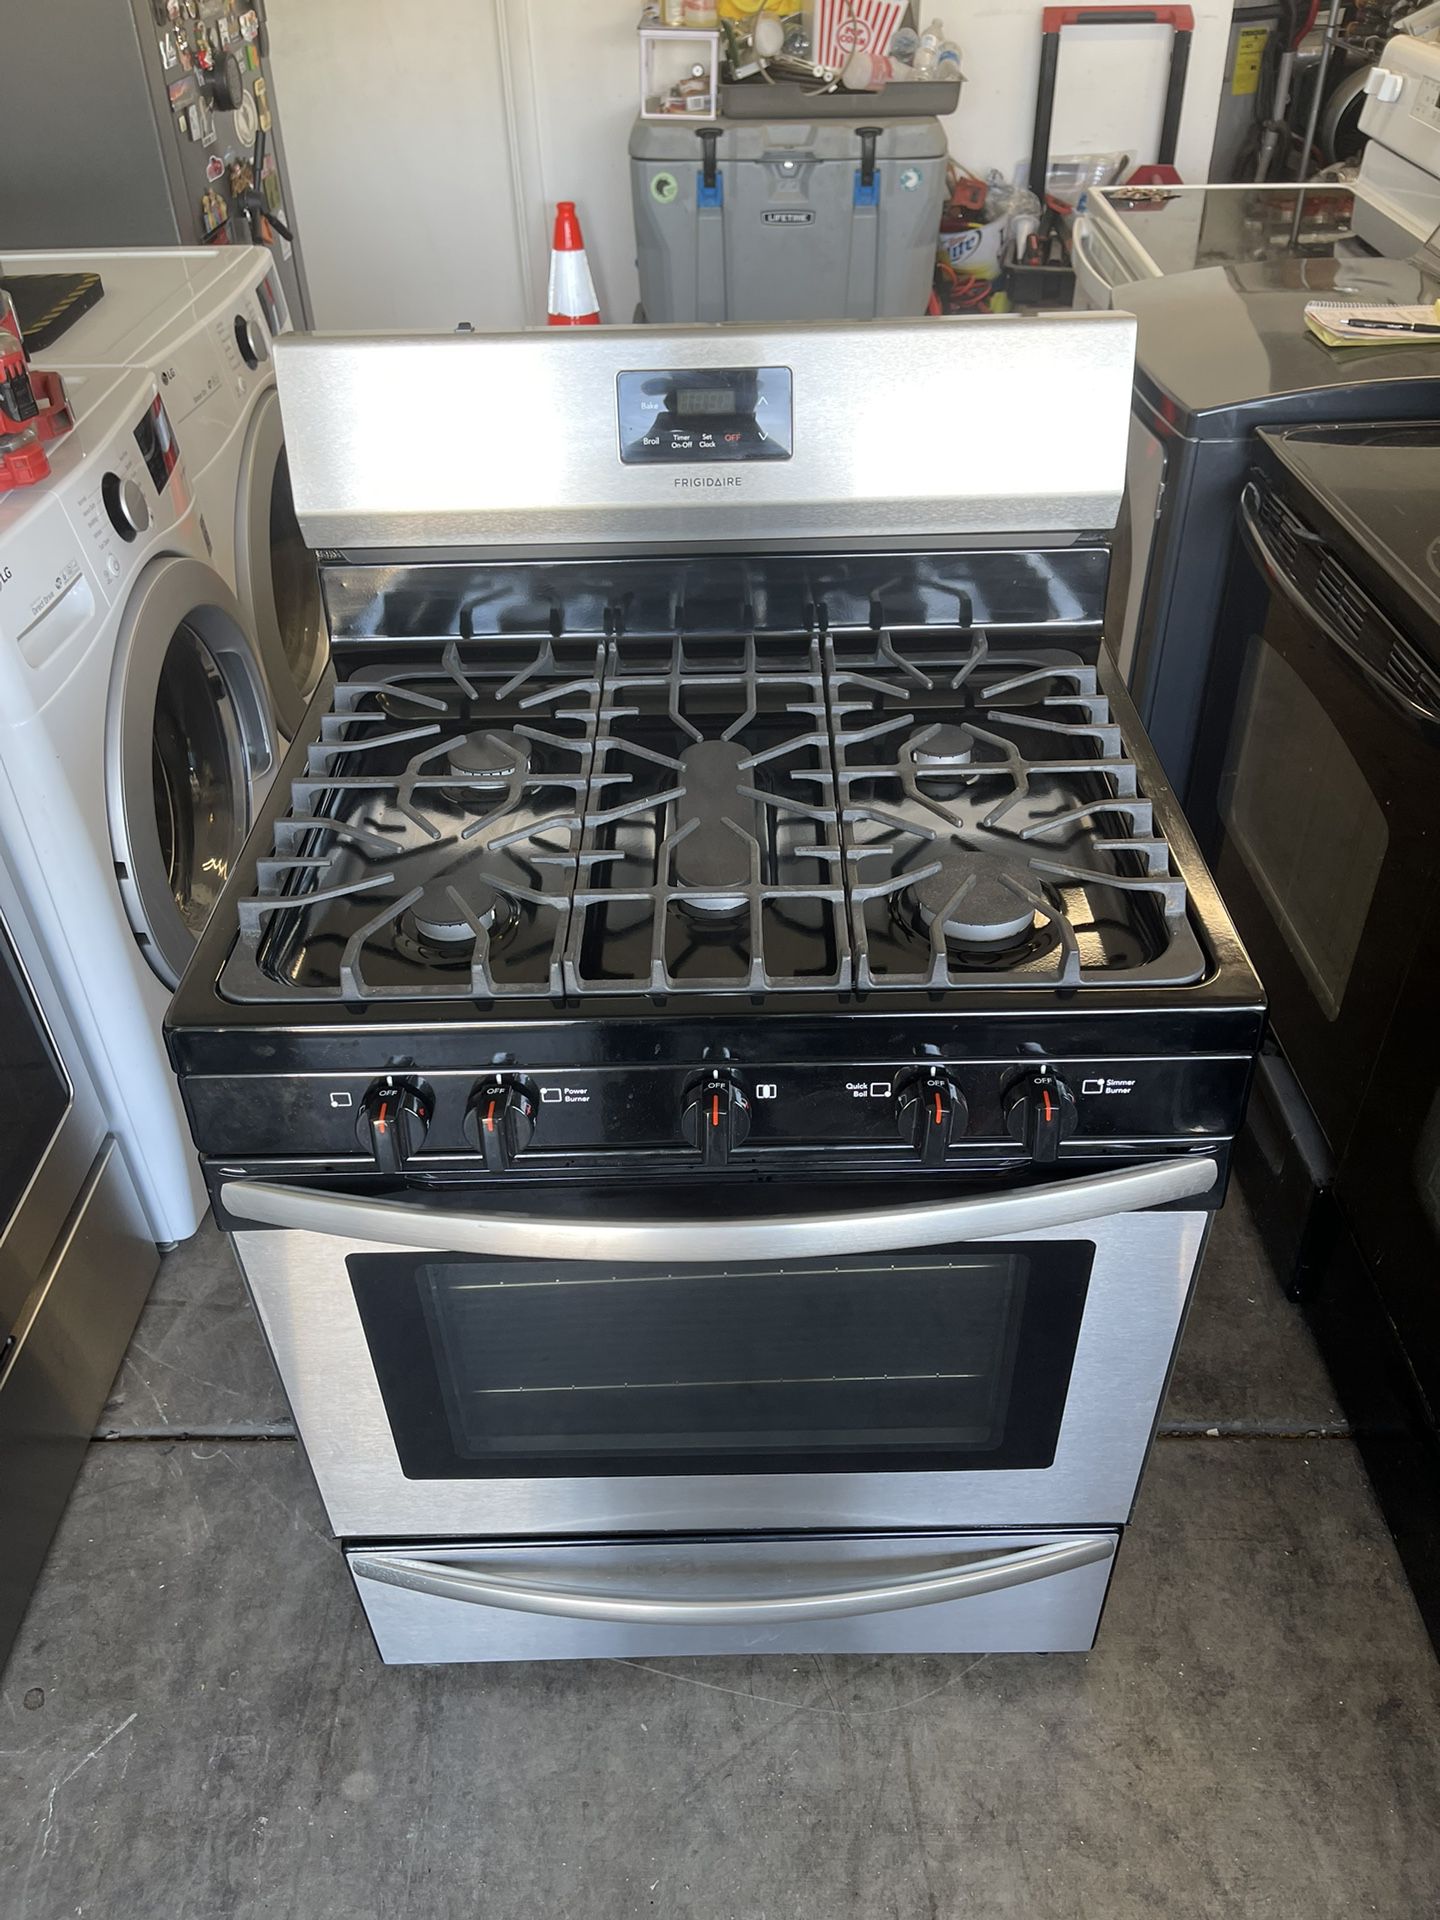 Range Stove Gas Stainless Steel 30 Day Warranty 